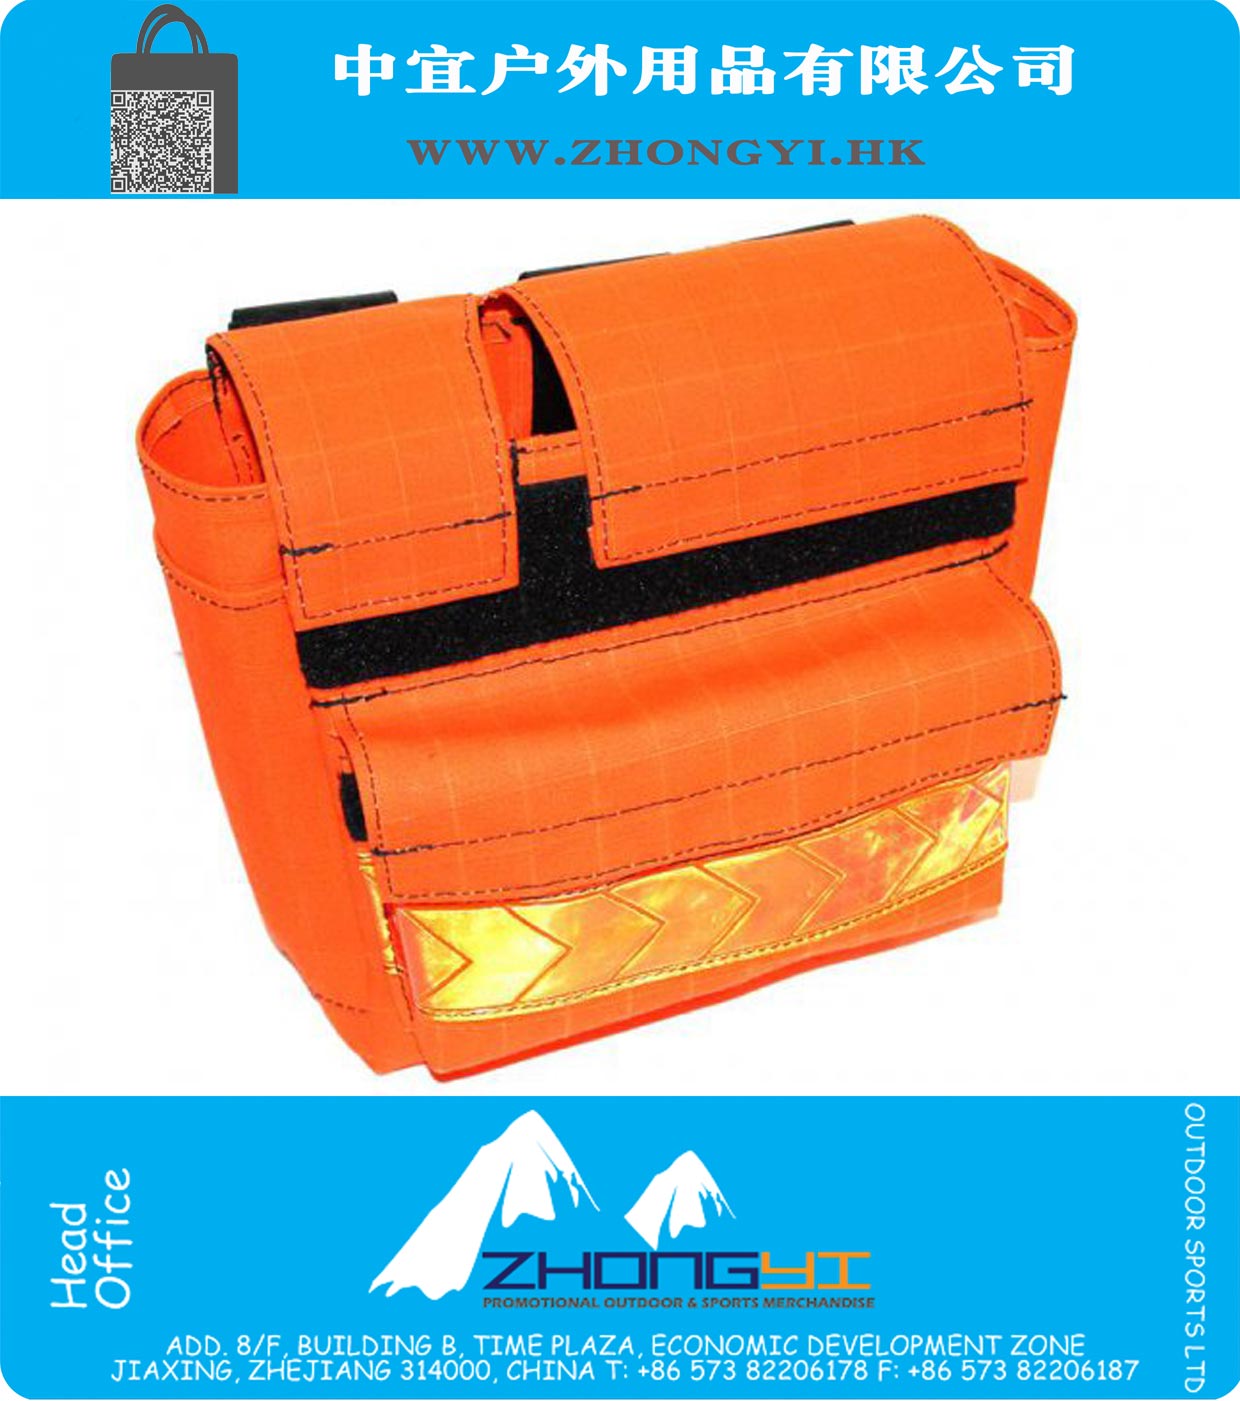 Canvas High Visibility Selbstretter Pouch